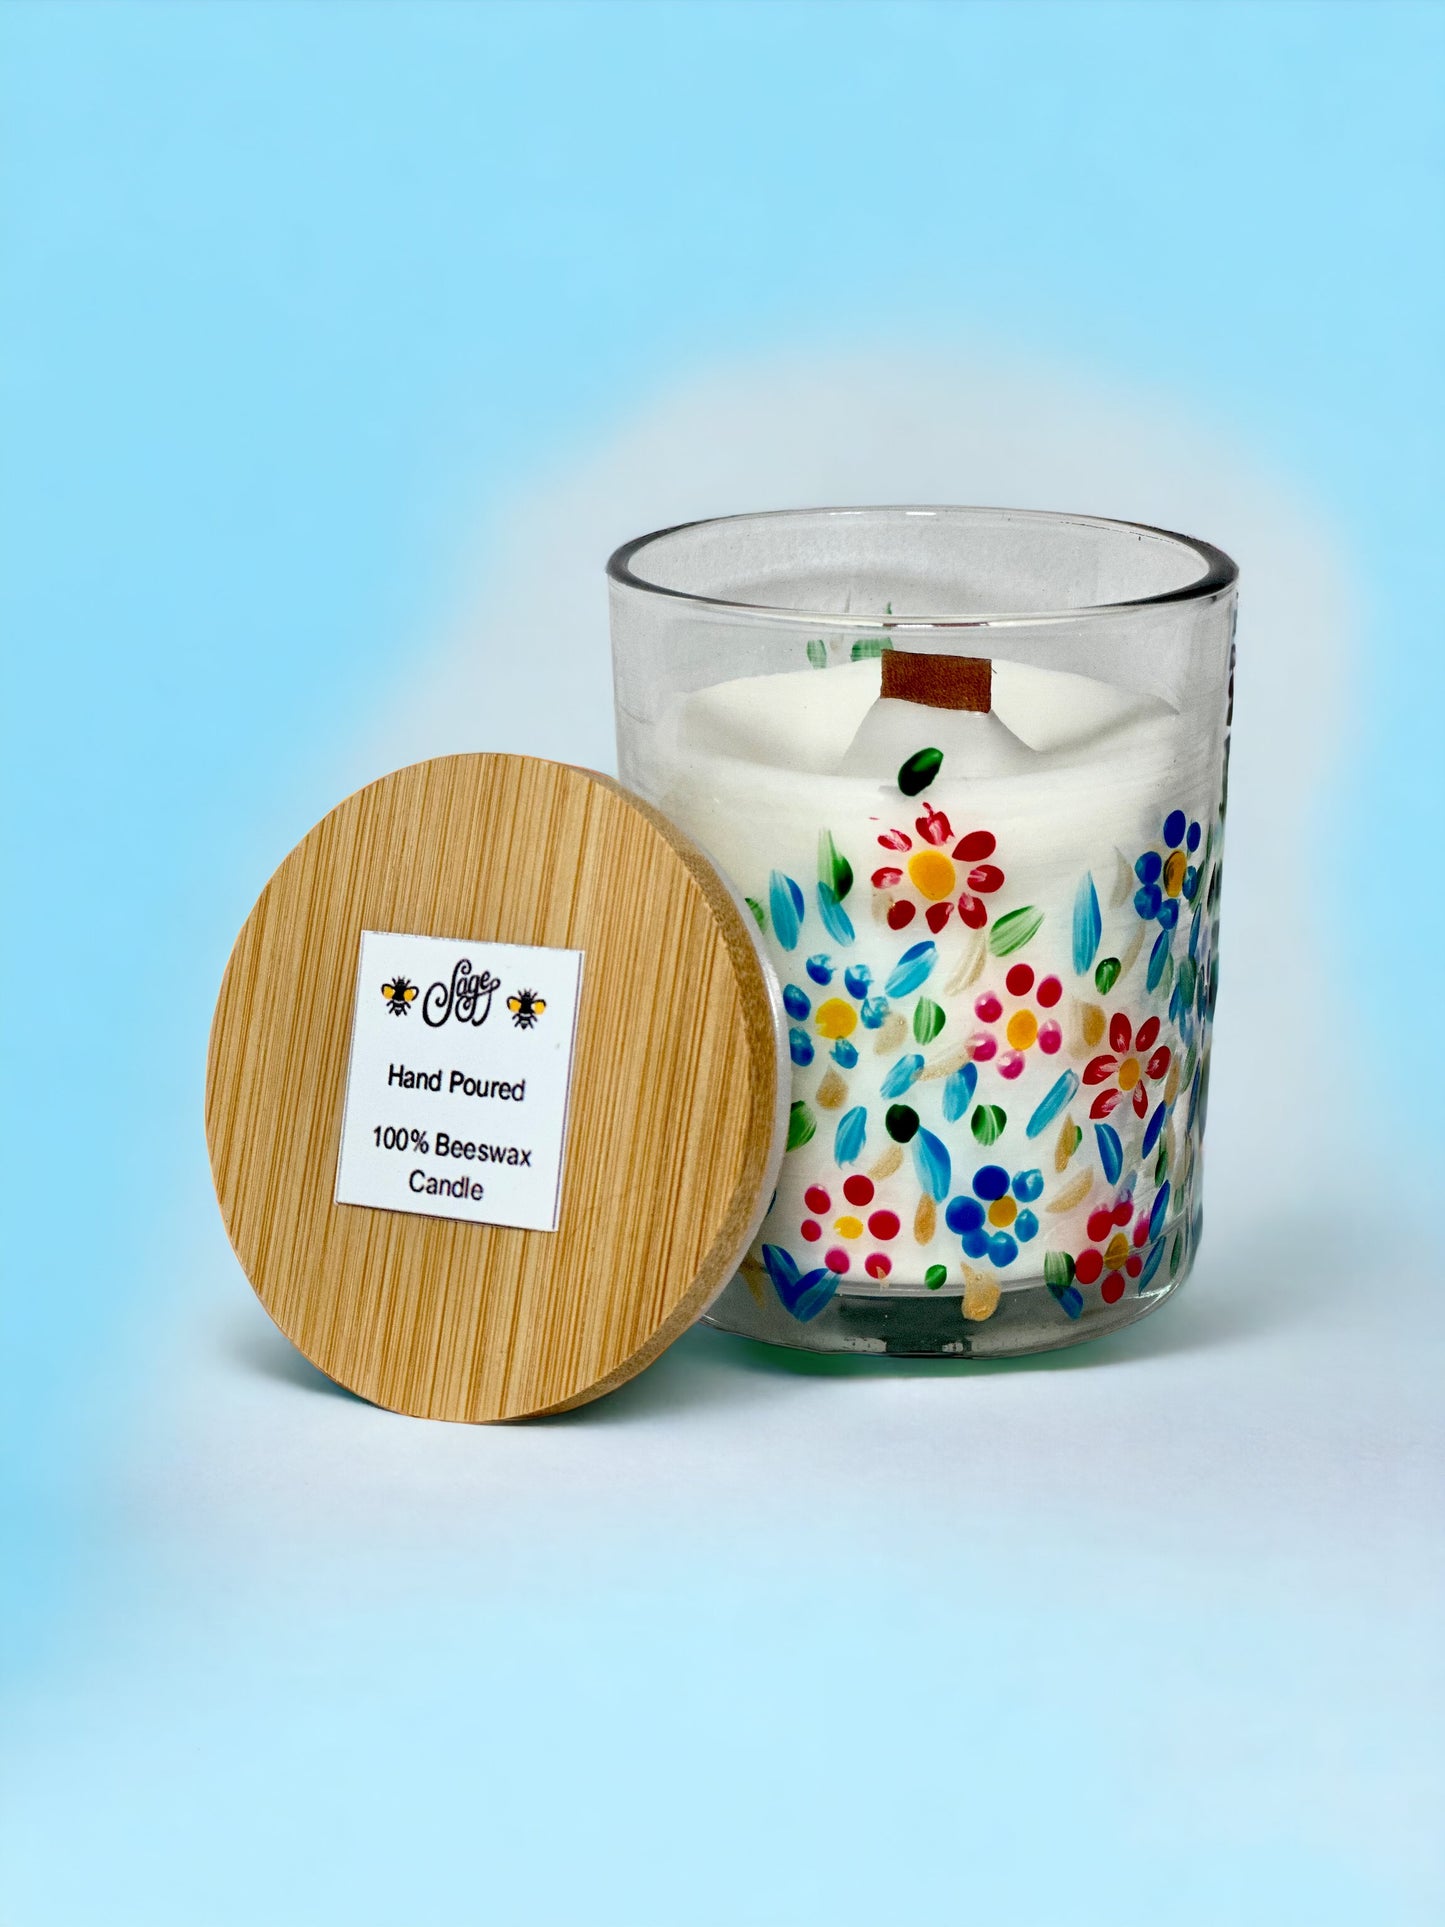 Beeswax Candles - 6 oz - Hand-painted glass container